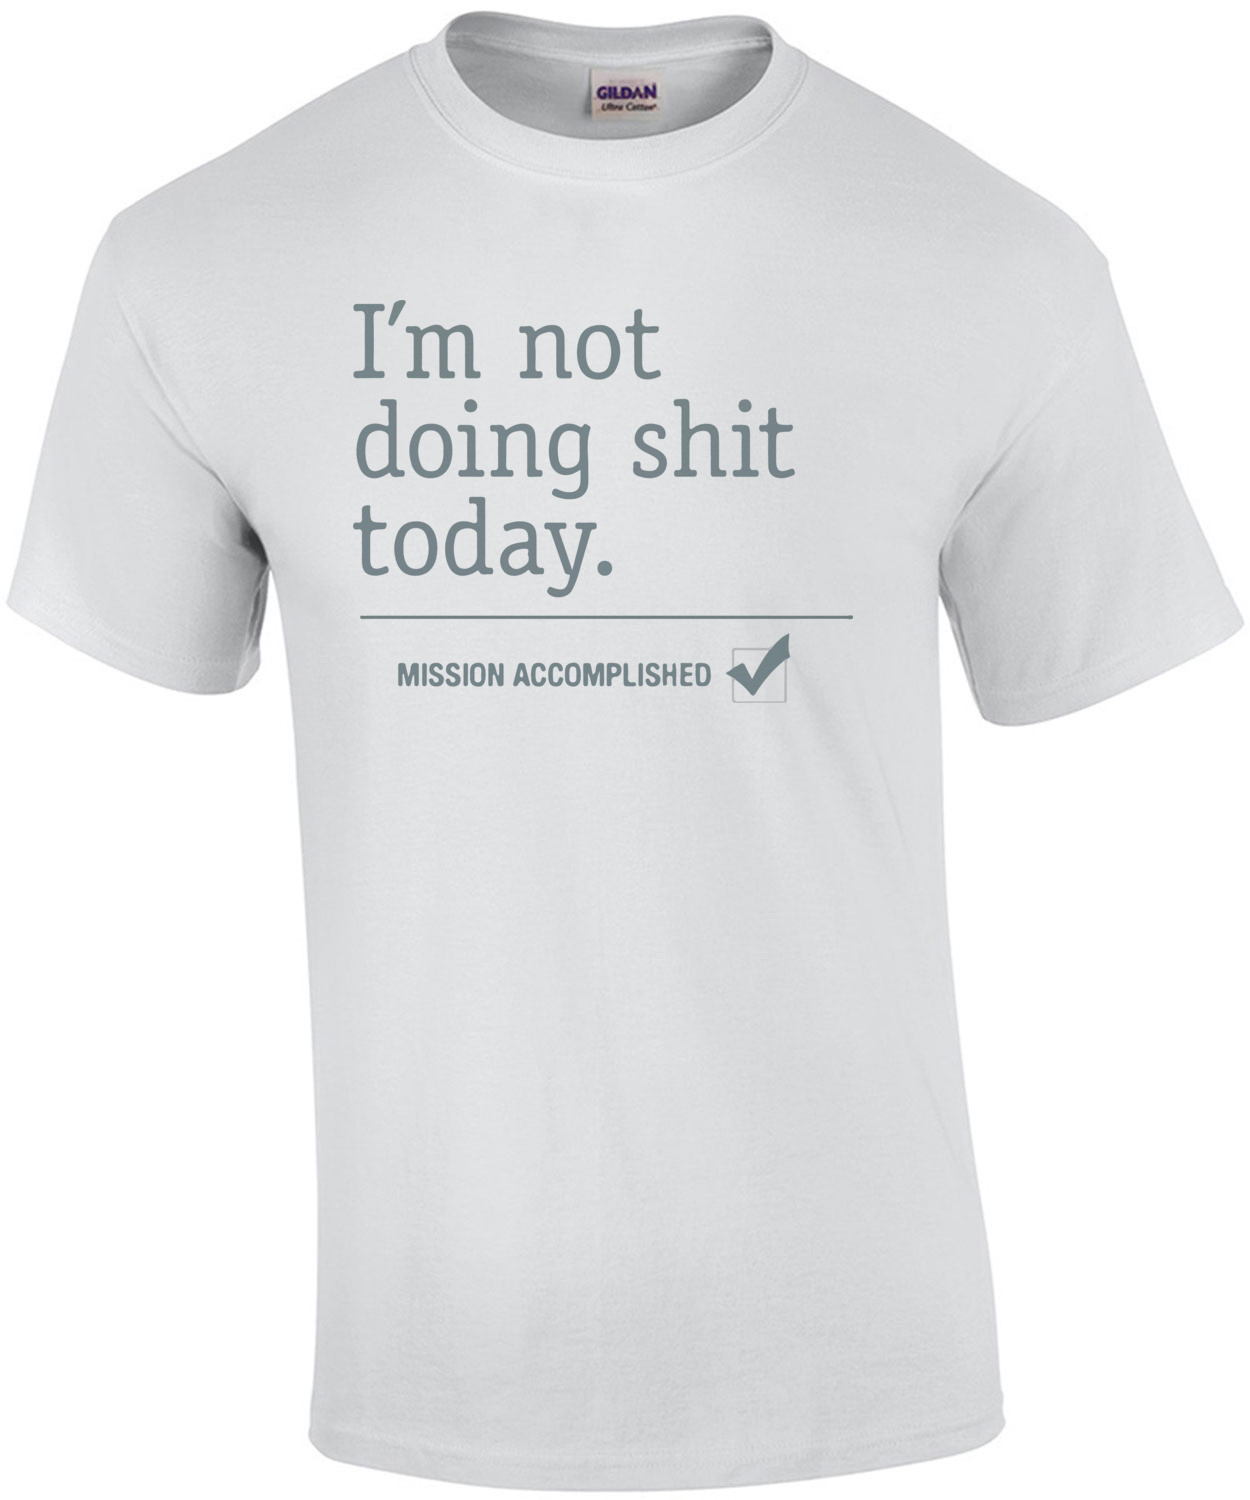 I'm not doing shit today. Mission Accomplished T-Shirt